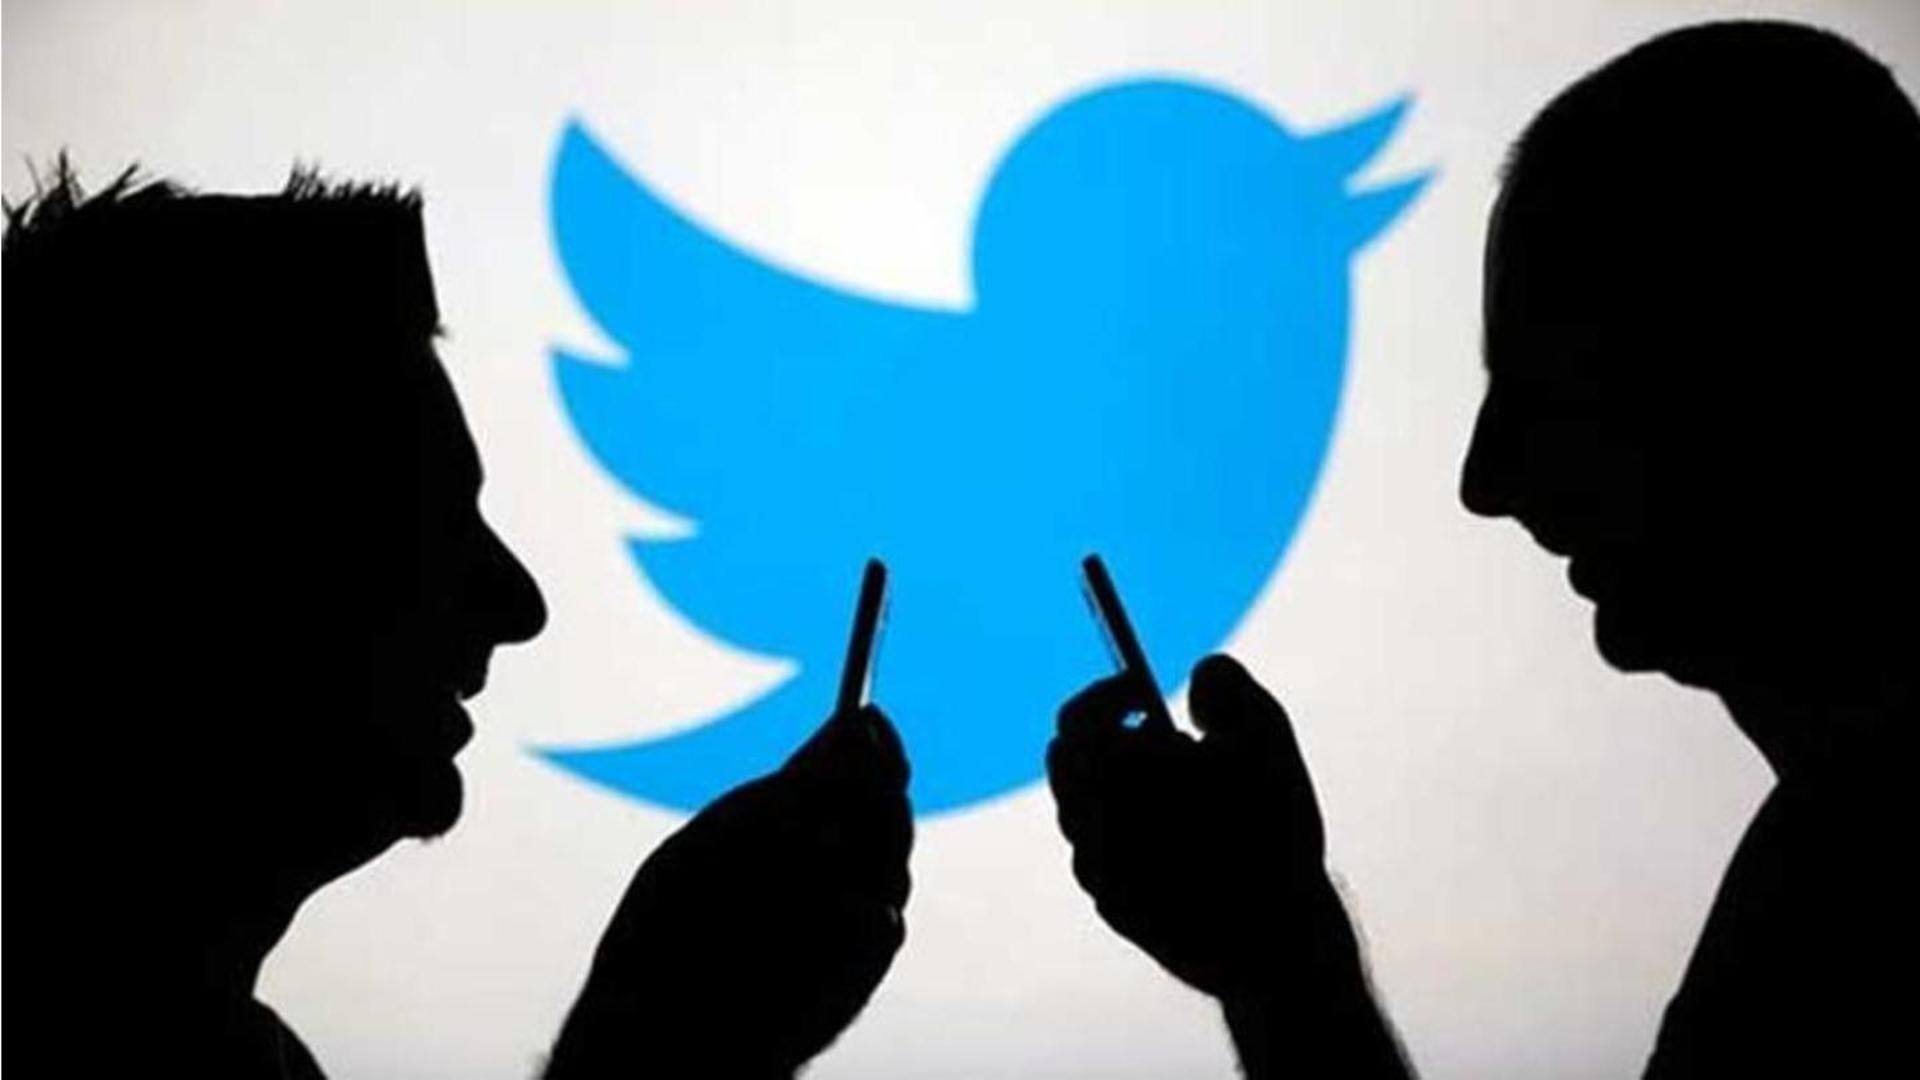 India among top nations seeking content removal last year: Twitter